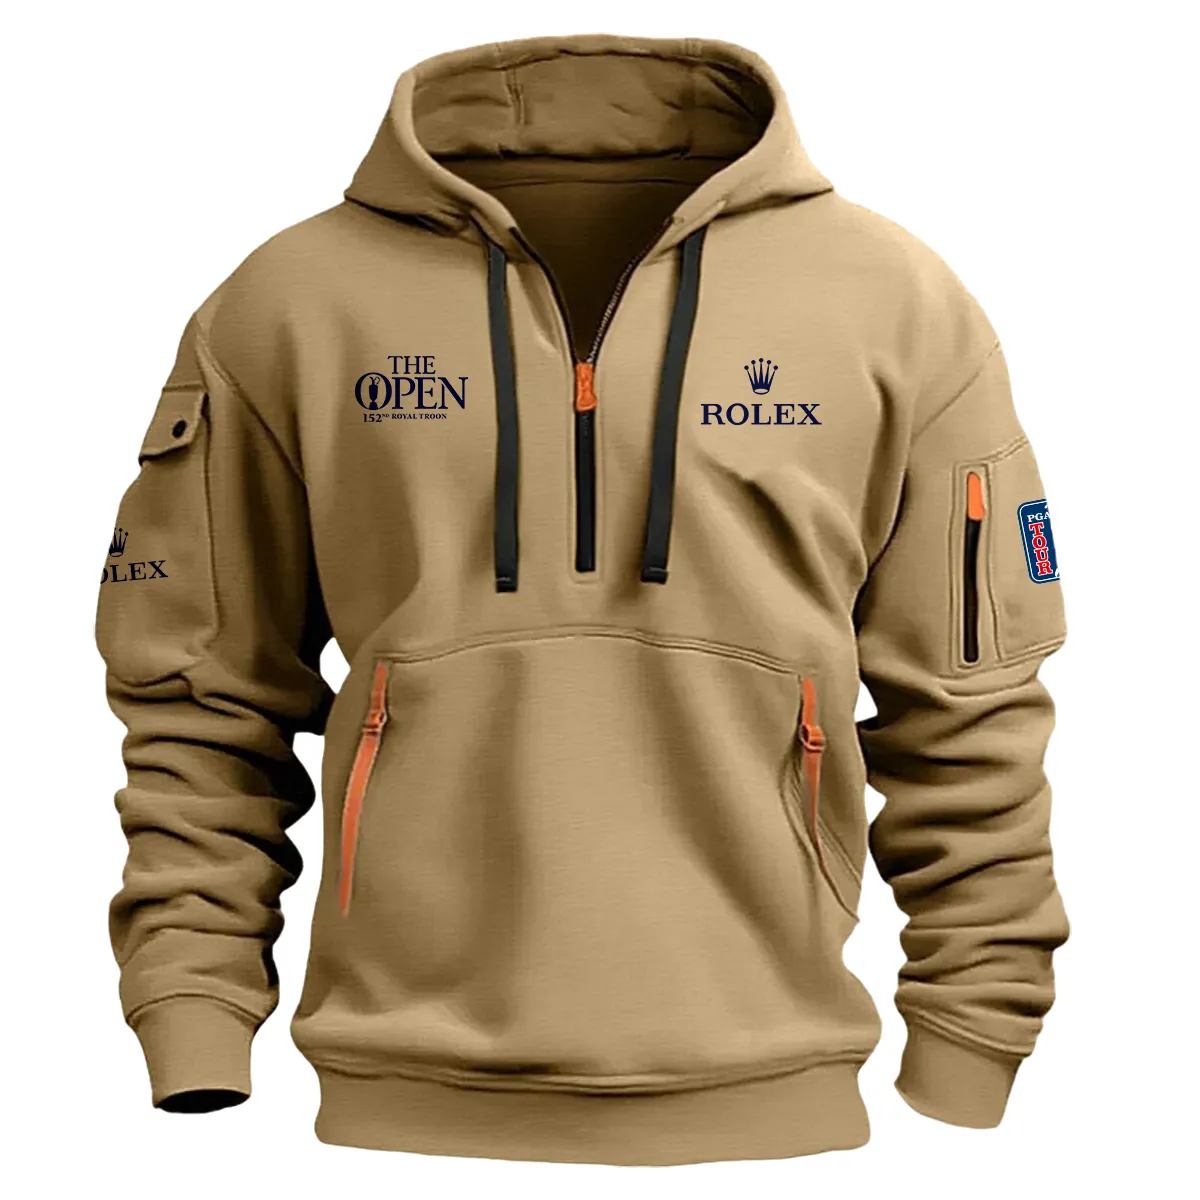 Khaki Color Rolex Fashion Hoodie Half Zipper 152nd The Open Championship Gift For Fans